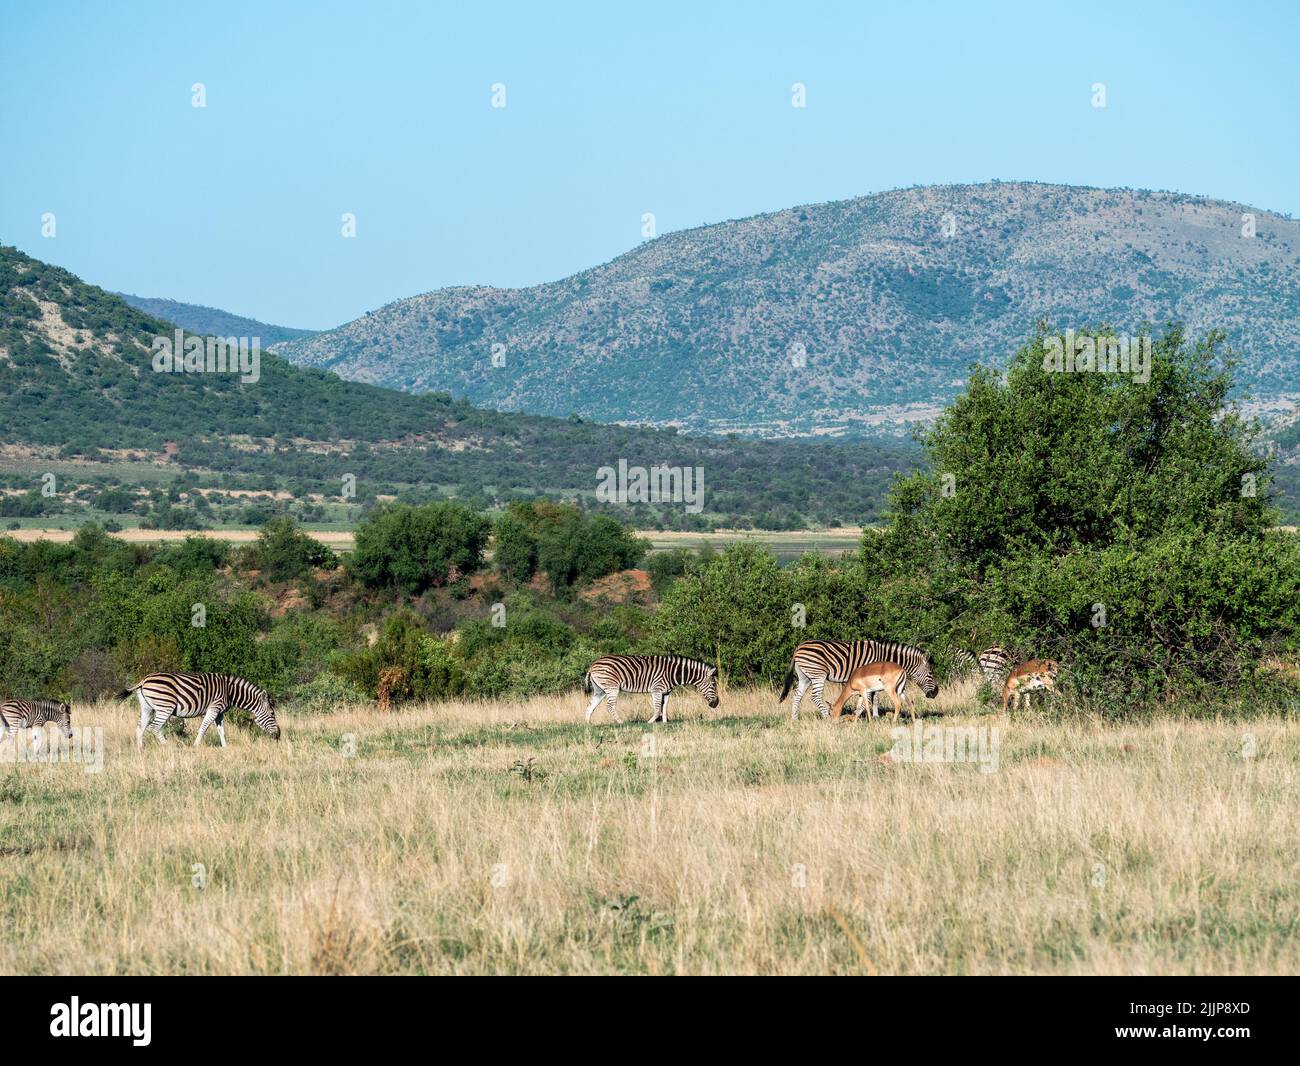 A beautiful shot of zebras and gazelles grazing on a field in the African Savanna Stock Photo